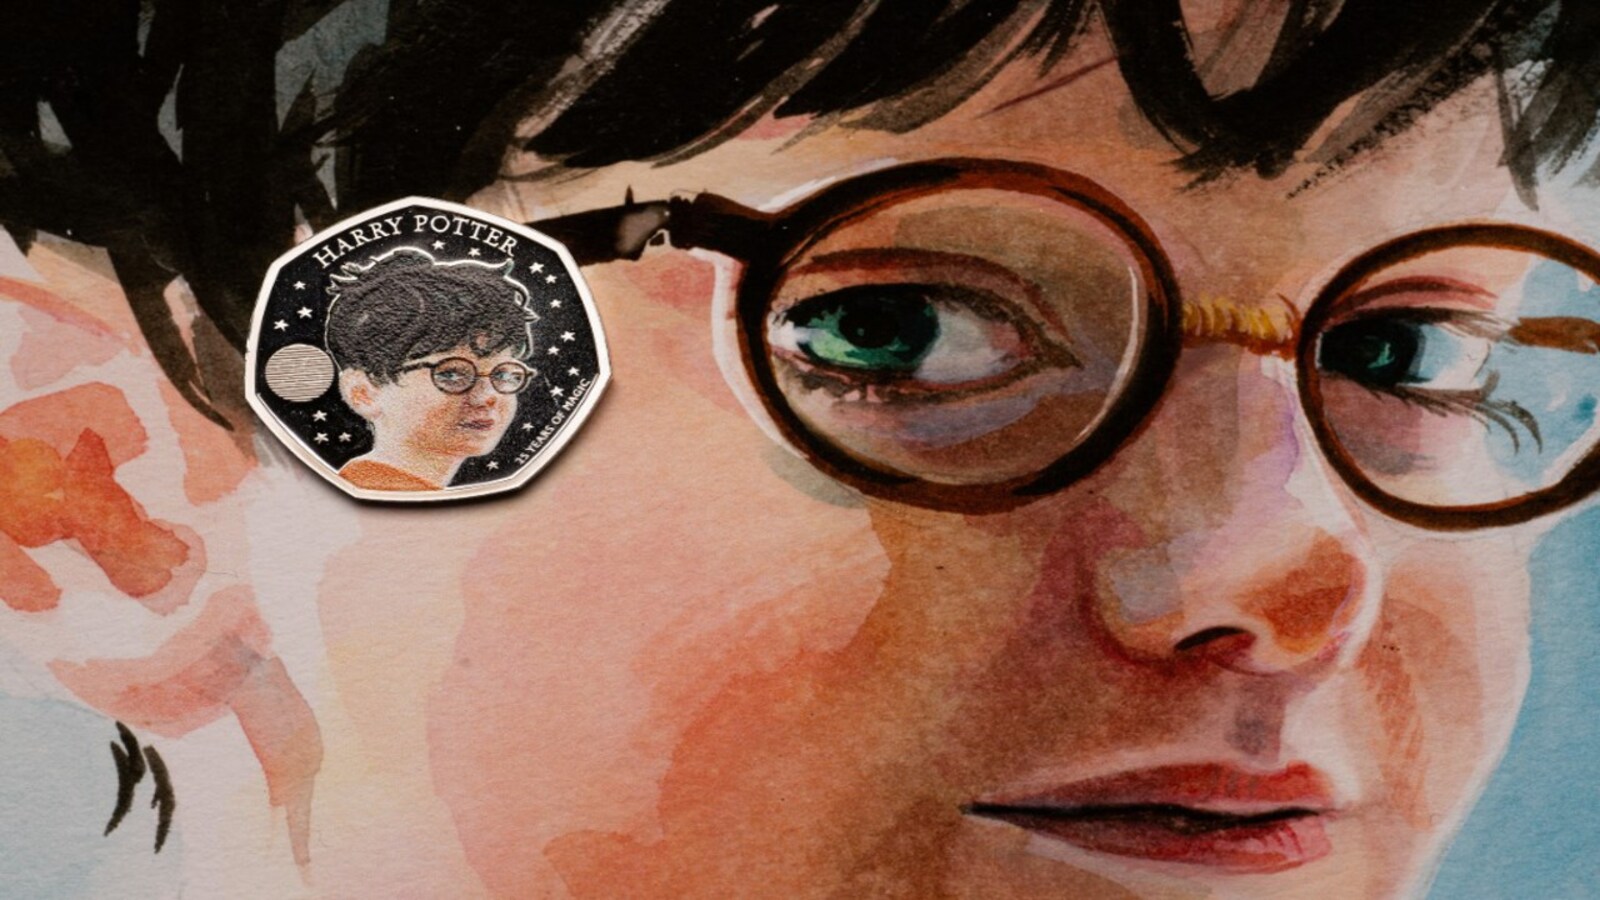 Harry Potter is on UK currency for the first time ever